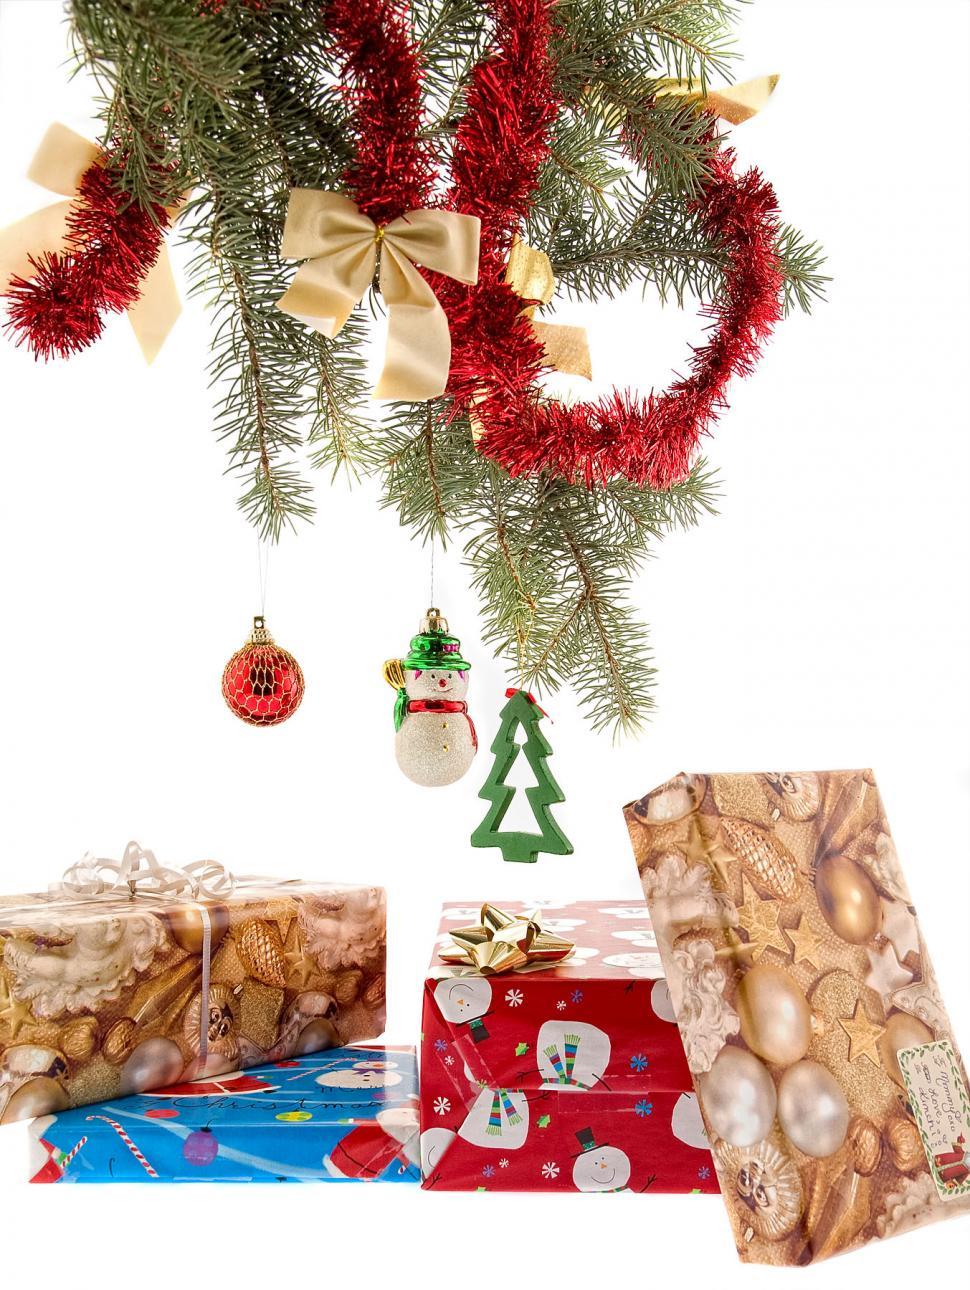 Free Image of Christmas Decorations 